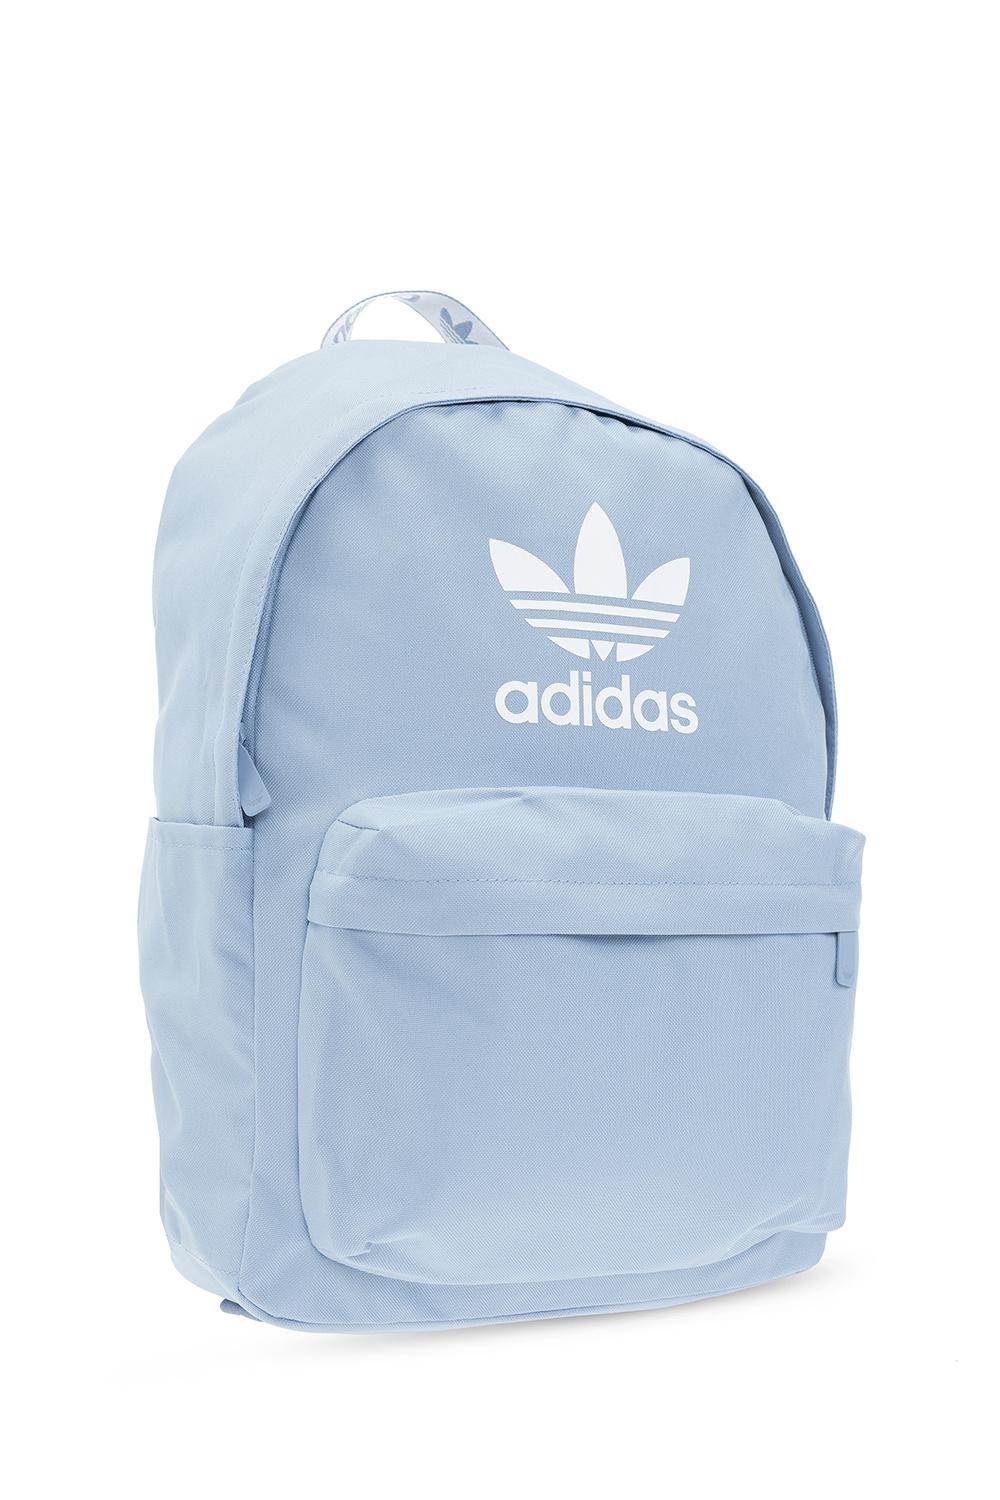 adidas Originals Backpack With Logo in Light Blue (Blue) for Men | Lyst